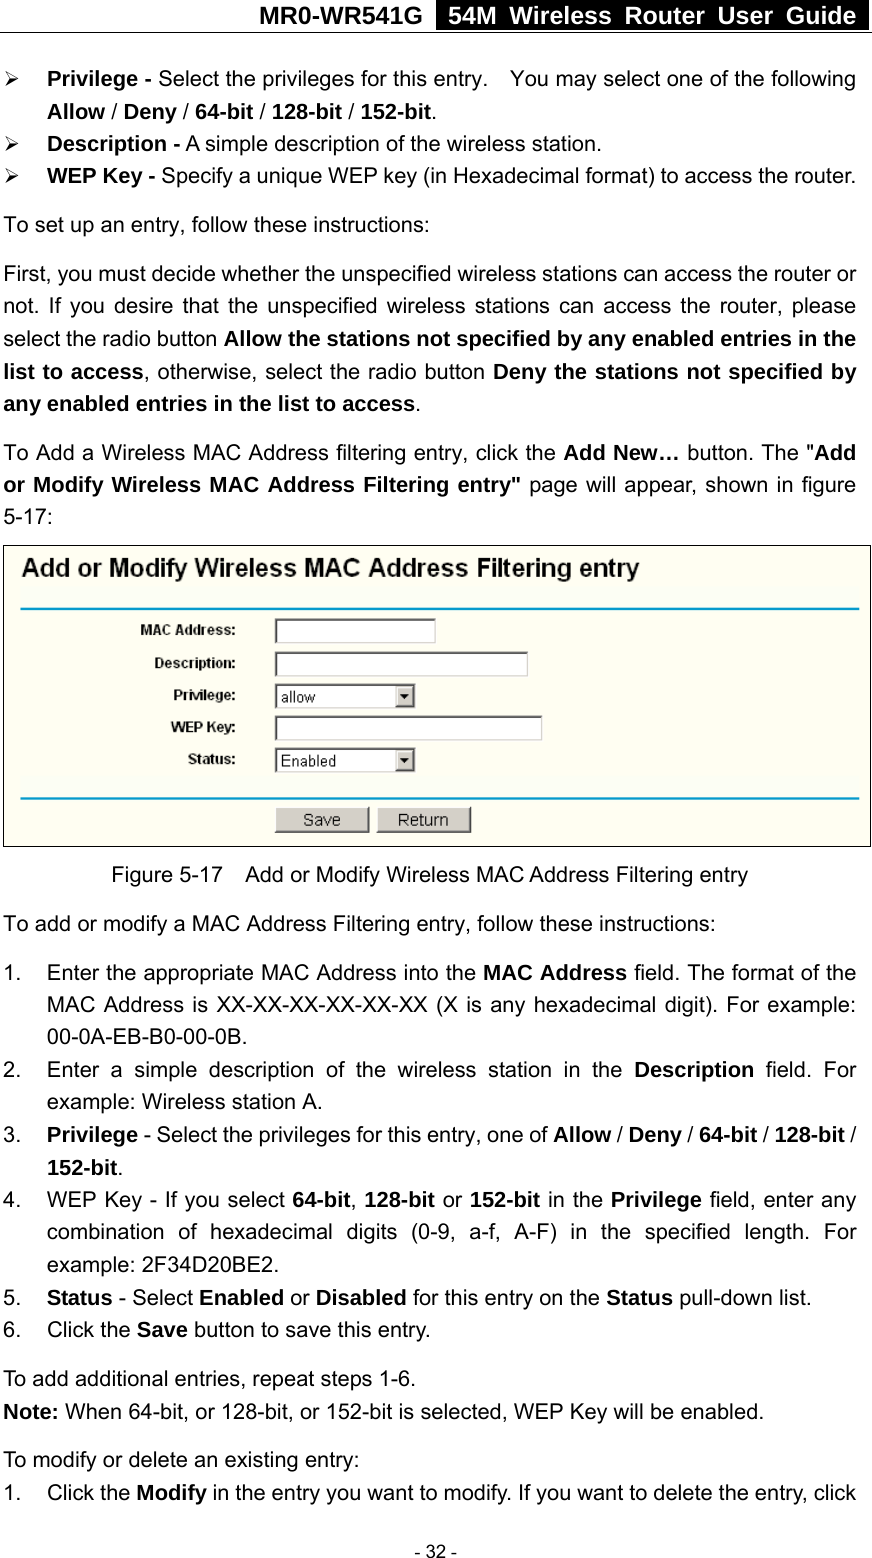 MR0-WR541G   54M Wireless Router User Guide  ¾ Privilege - Select the privileges for this entry.    You may select one of the following Allow / Deny / 64-bit / 128-bit / 152-bit.   ¾ Description - A simple description of the wireless station.   ¾ WEP Key - Specify a unique WEP key (in Hexadecimal format) to access the router.   To set up an entry, follow these instructions:   First, you must decide whether the unspecified wireless stations can access the router or not. If you desire that the unspecified wireless stations can access the router, please select the radio button Allow the stations not specified by any enabled entries in the list to access, otherwise, select the radio button Deny the stations not specified by any enabled entries in the list to access. To Add a Wireless MAC Address filtering entry, click the Add New… button. The &quot;Add or Modify Wireless MAC Address Filtering entry&quot; page will appear, shown in figure 5-17:  Figure 5-17    Add or Modify Wireless MAC Address Filtering entry To add or modify a MAC Address Filtering entry, follow these instructions: 1.  Enter the appropriate MAC Address into the MAC Address field. The format of the MAC Address is XX-XX-XX-XX-XX-XX (X is any hexadecimal digit). For example: 00-0A-EB-B0-00-0B.  2.  Enter a simple description of the wireless station in the Description field. For example: Wireless station A. 3.  Privilege - Select the privileges for this entry, one of Allow / Deny / 64-bit / 128-bit / 152-bit.  4.  WEP Key - If you select 64-bit, 128-bit or 152-bit in the Privilege field, enter any combination of hexadecimal digits (0-9, a-f, A-F) in the specified length. For example: 2F34D20BE2.   5.  Status - Select Enabled or Disabled for this entry on the Status pull-down list. 6. Click the Save button to save this entry. To add additional entries, repeat steps 1-6. Note: When 64-bit, or 128-bit, or 152-bit is selected, WEP Key will be enabled.   To modify or delete an existing entry: 1. Click the Modify in the entry you want to modify. If you want to delete the entry, click  - 32 - 